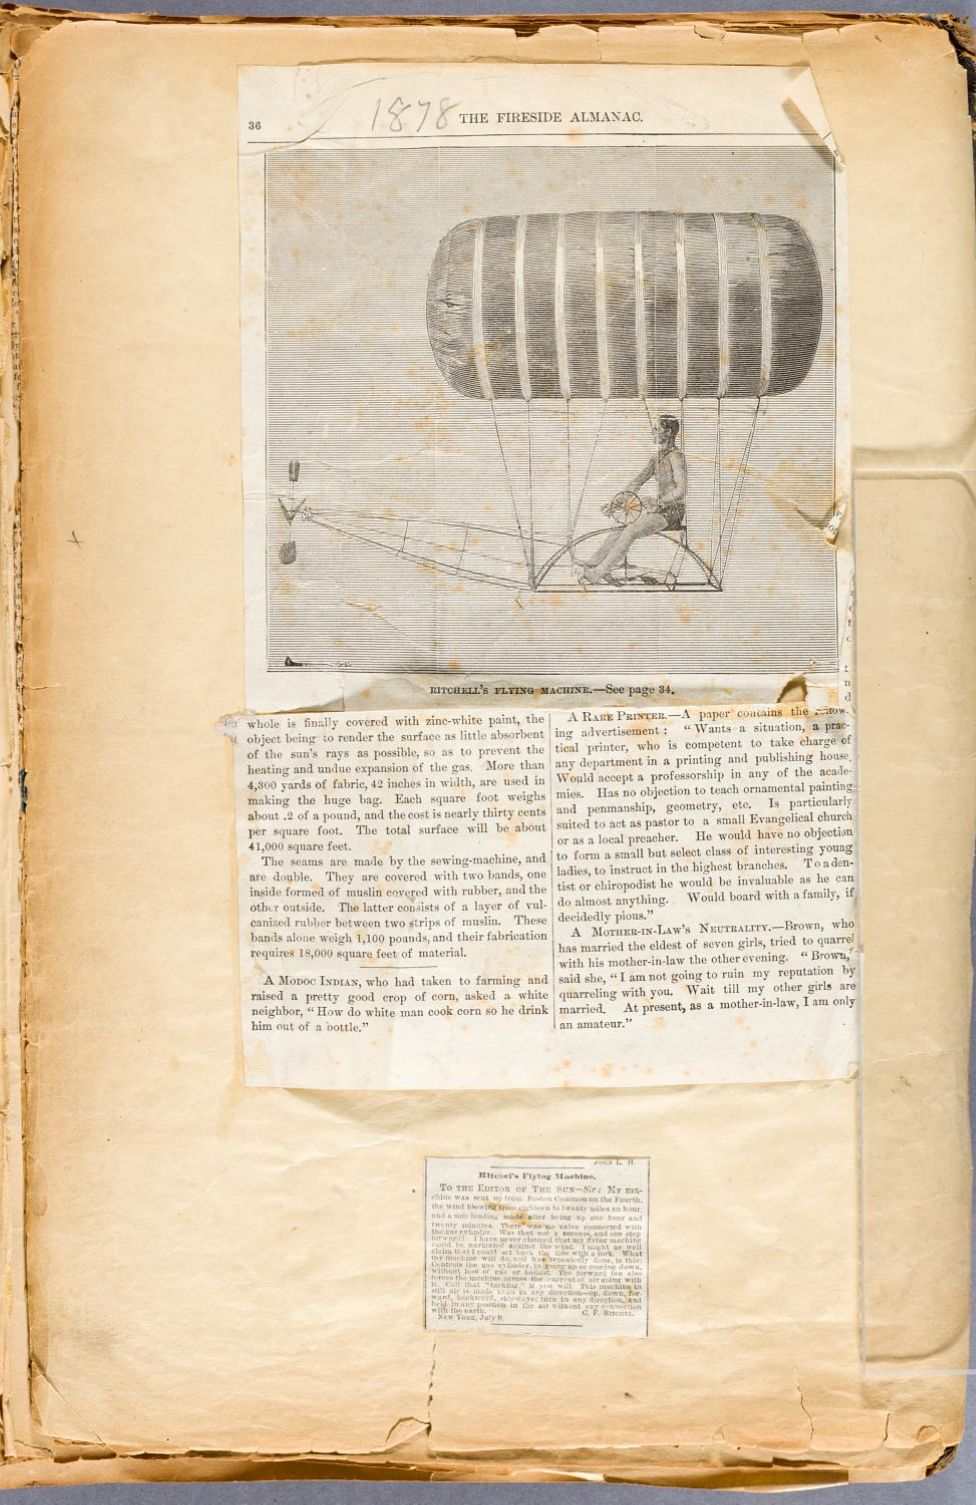 A page from Ritchel's ballooning scrapbook